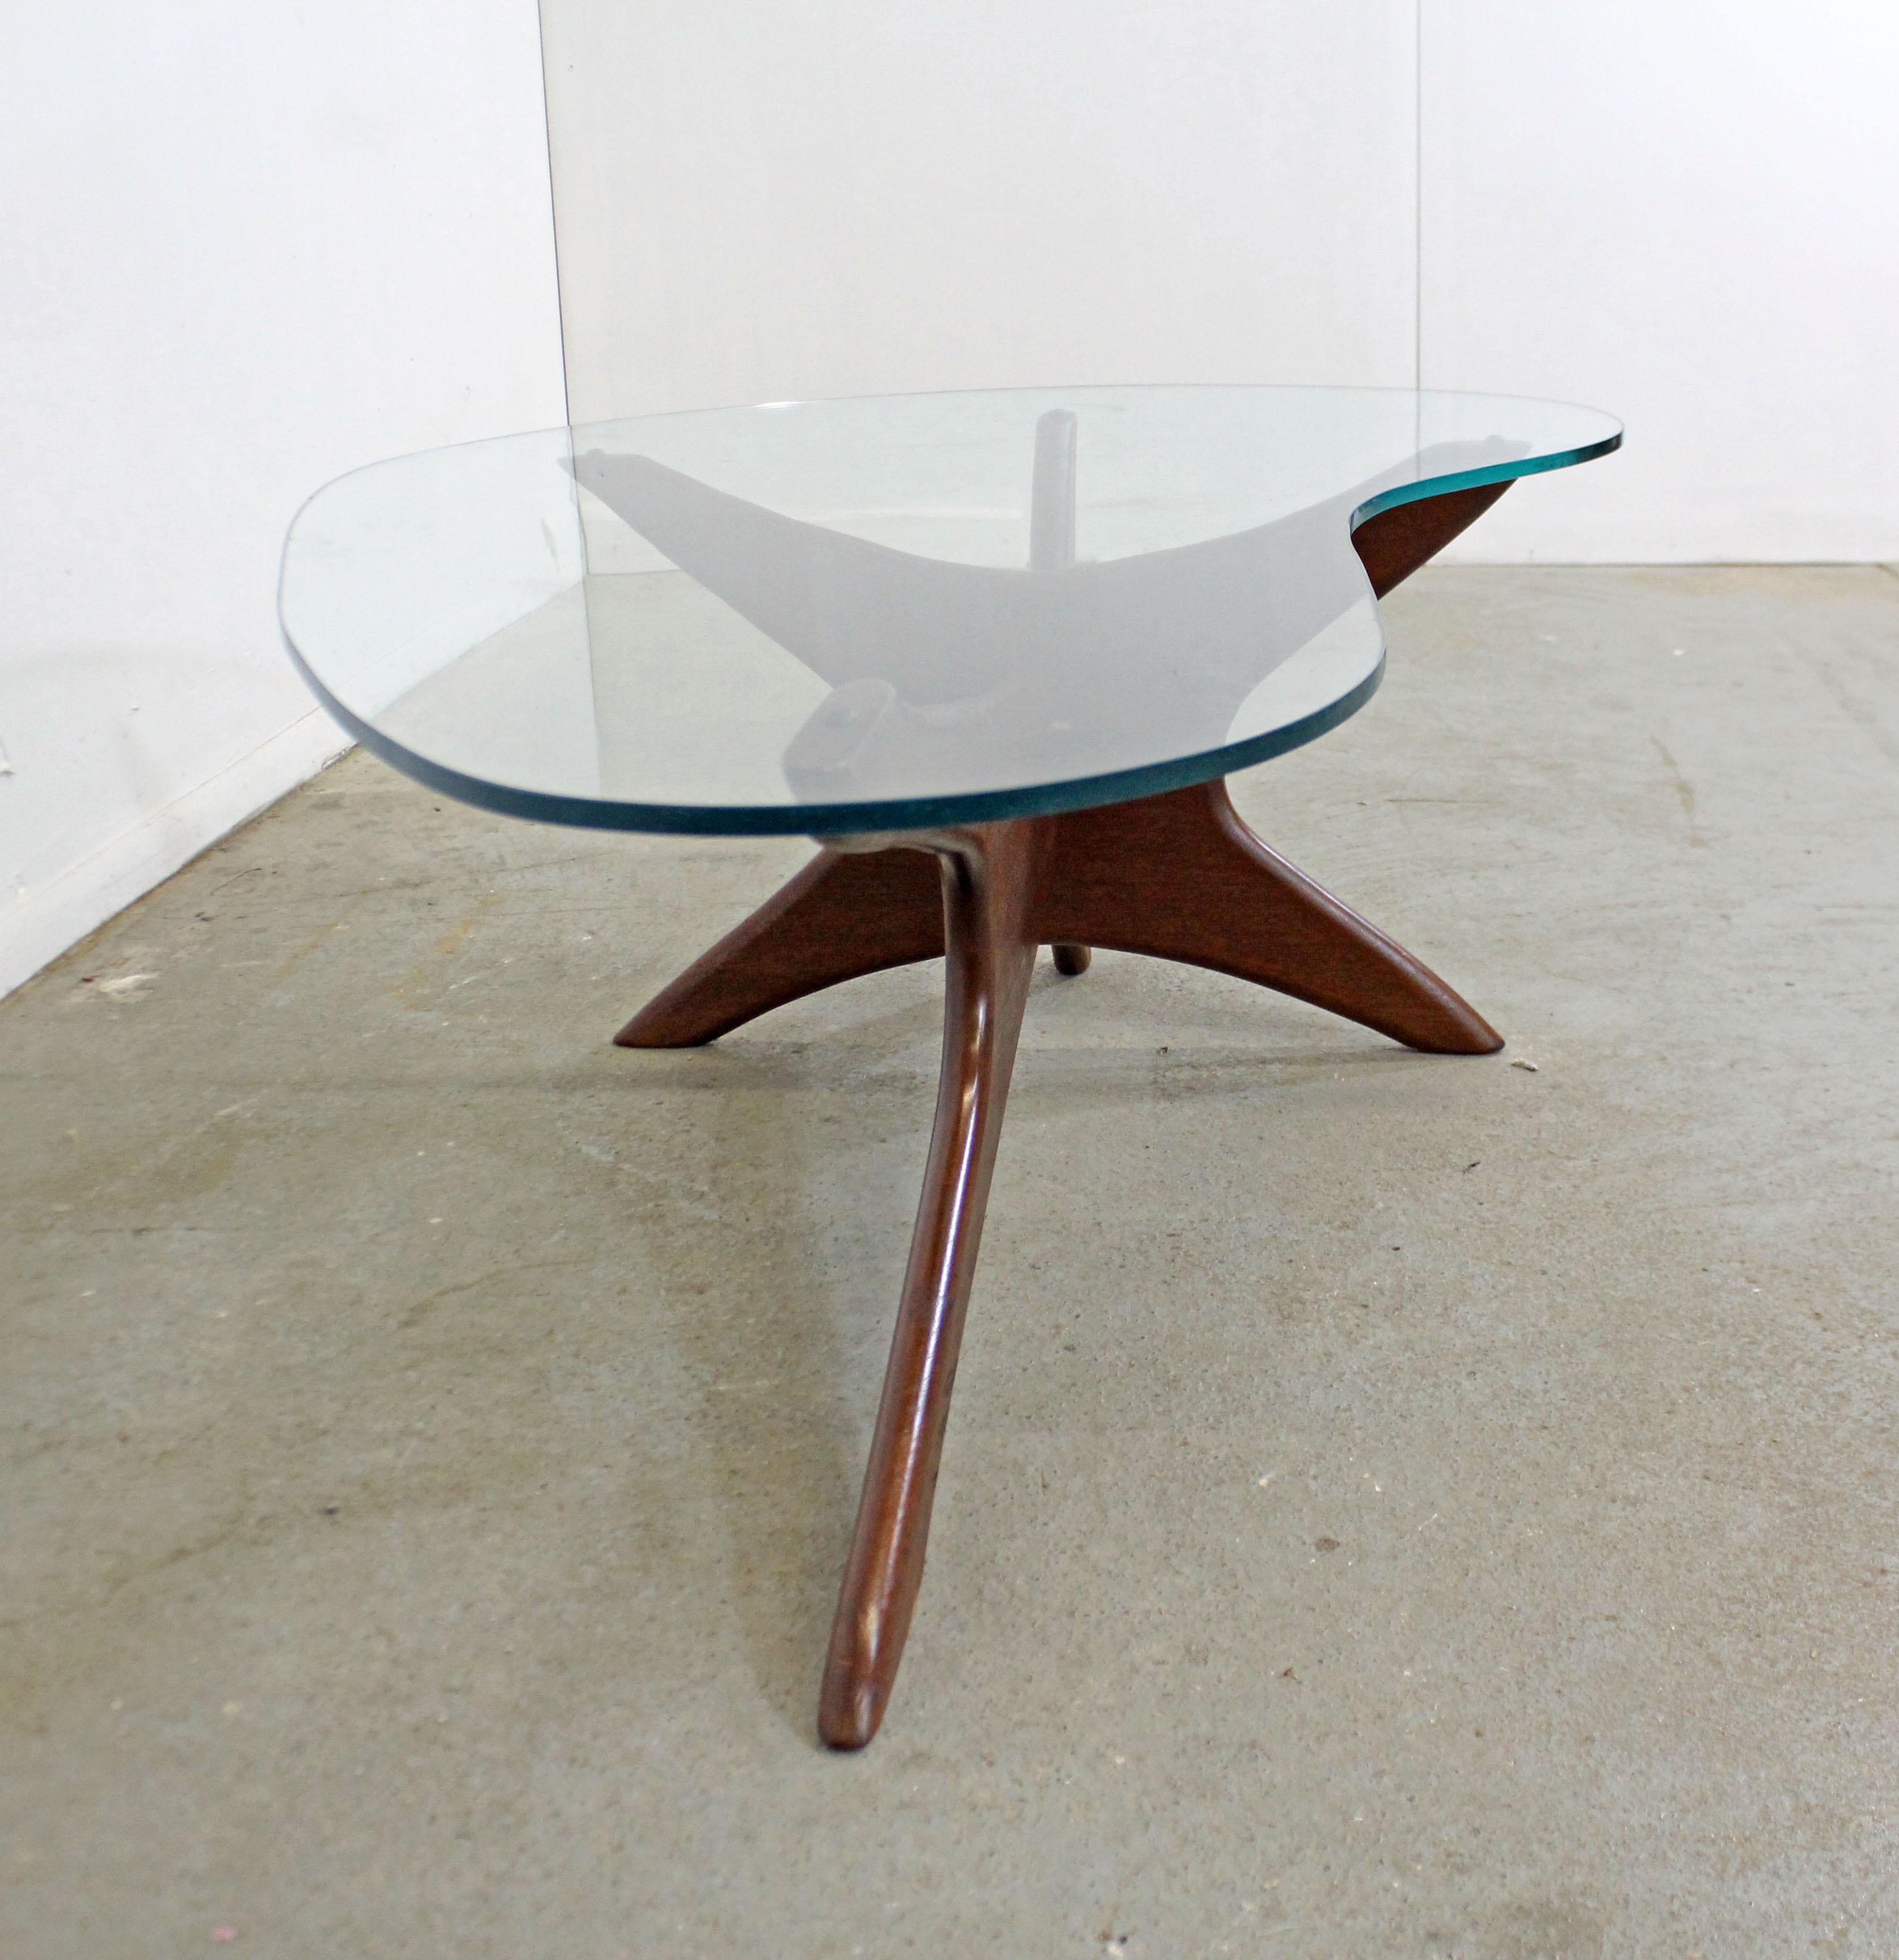 Offered is an authentic Adrian Pearsall 'Stingray' coffee table with a gorgeous sculptural wooden base and glass top. It was designed by Adrian Pearsall for Craft Associates. It is in good condition for its age, shows small chips and surface